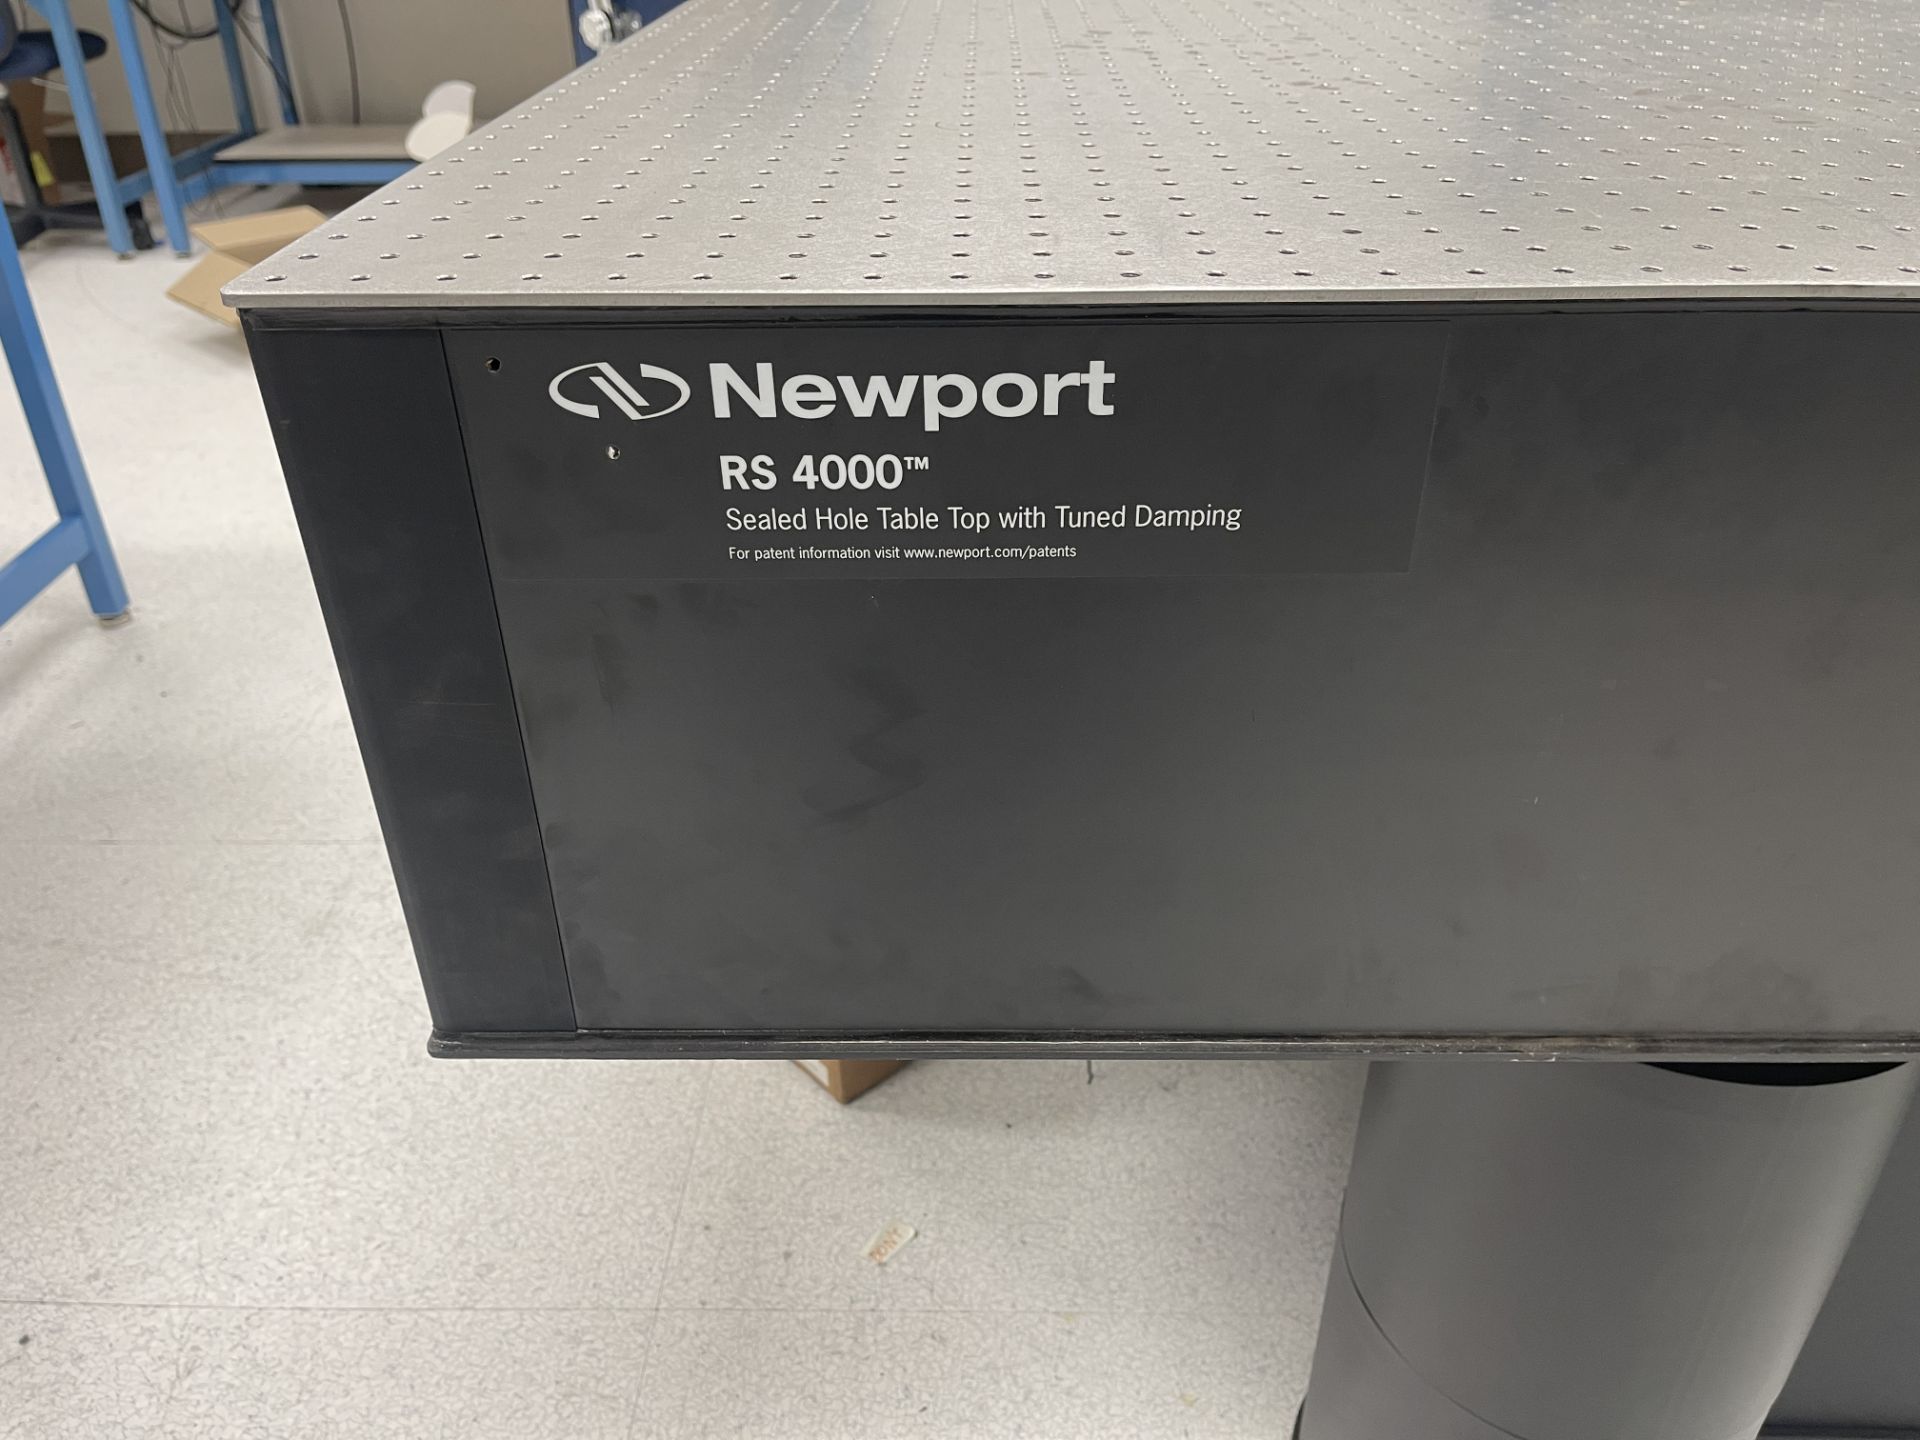 Newport RS4000 Seated Hole Table Top with Turned Damping - Image 2 of 2